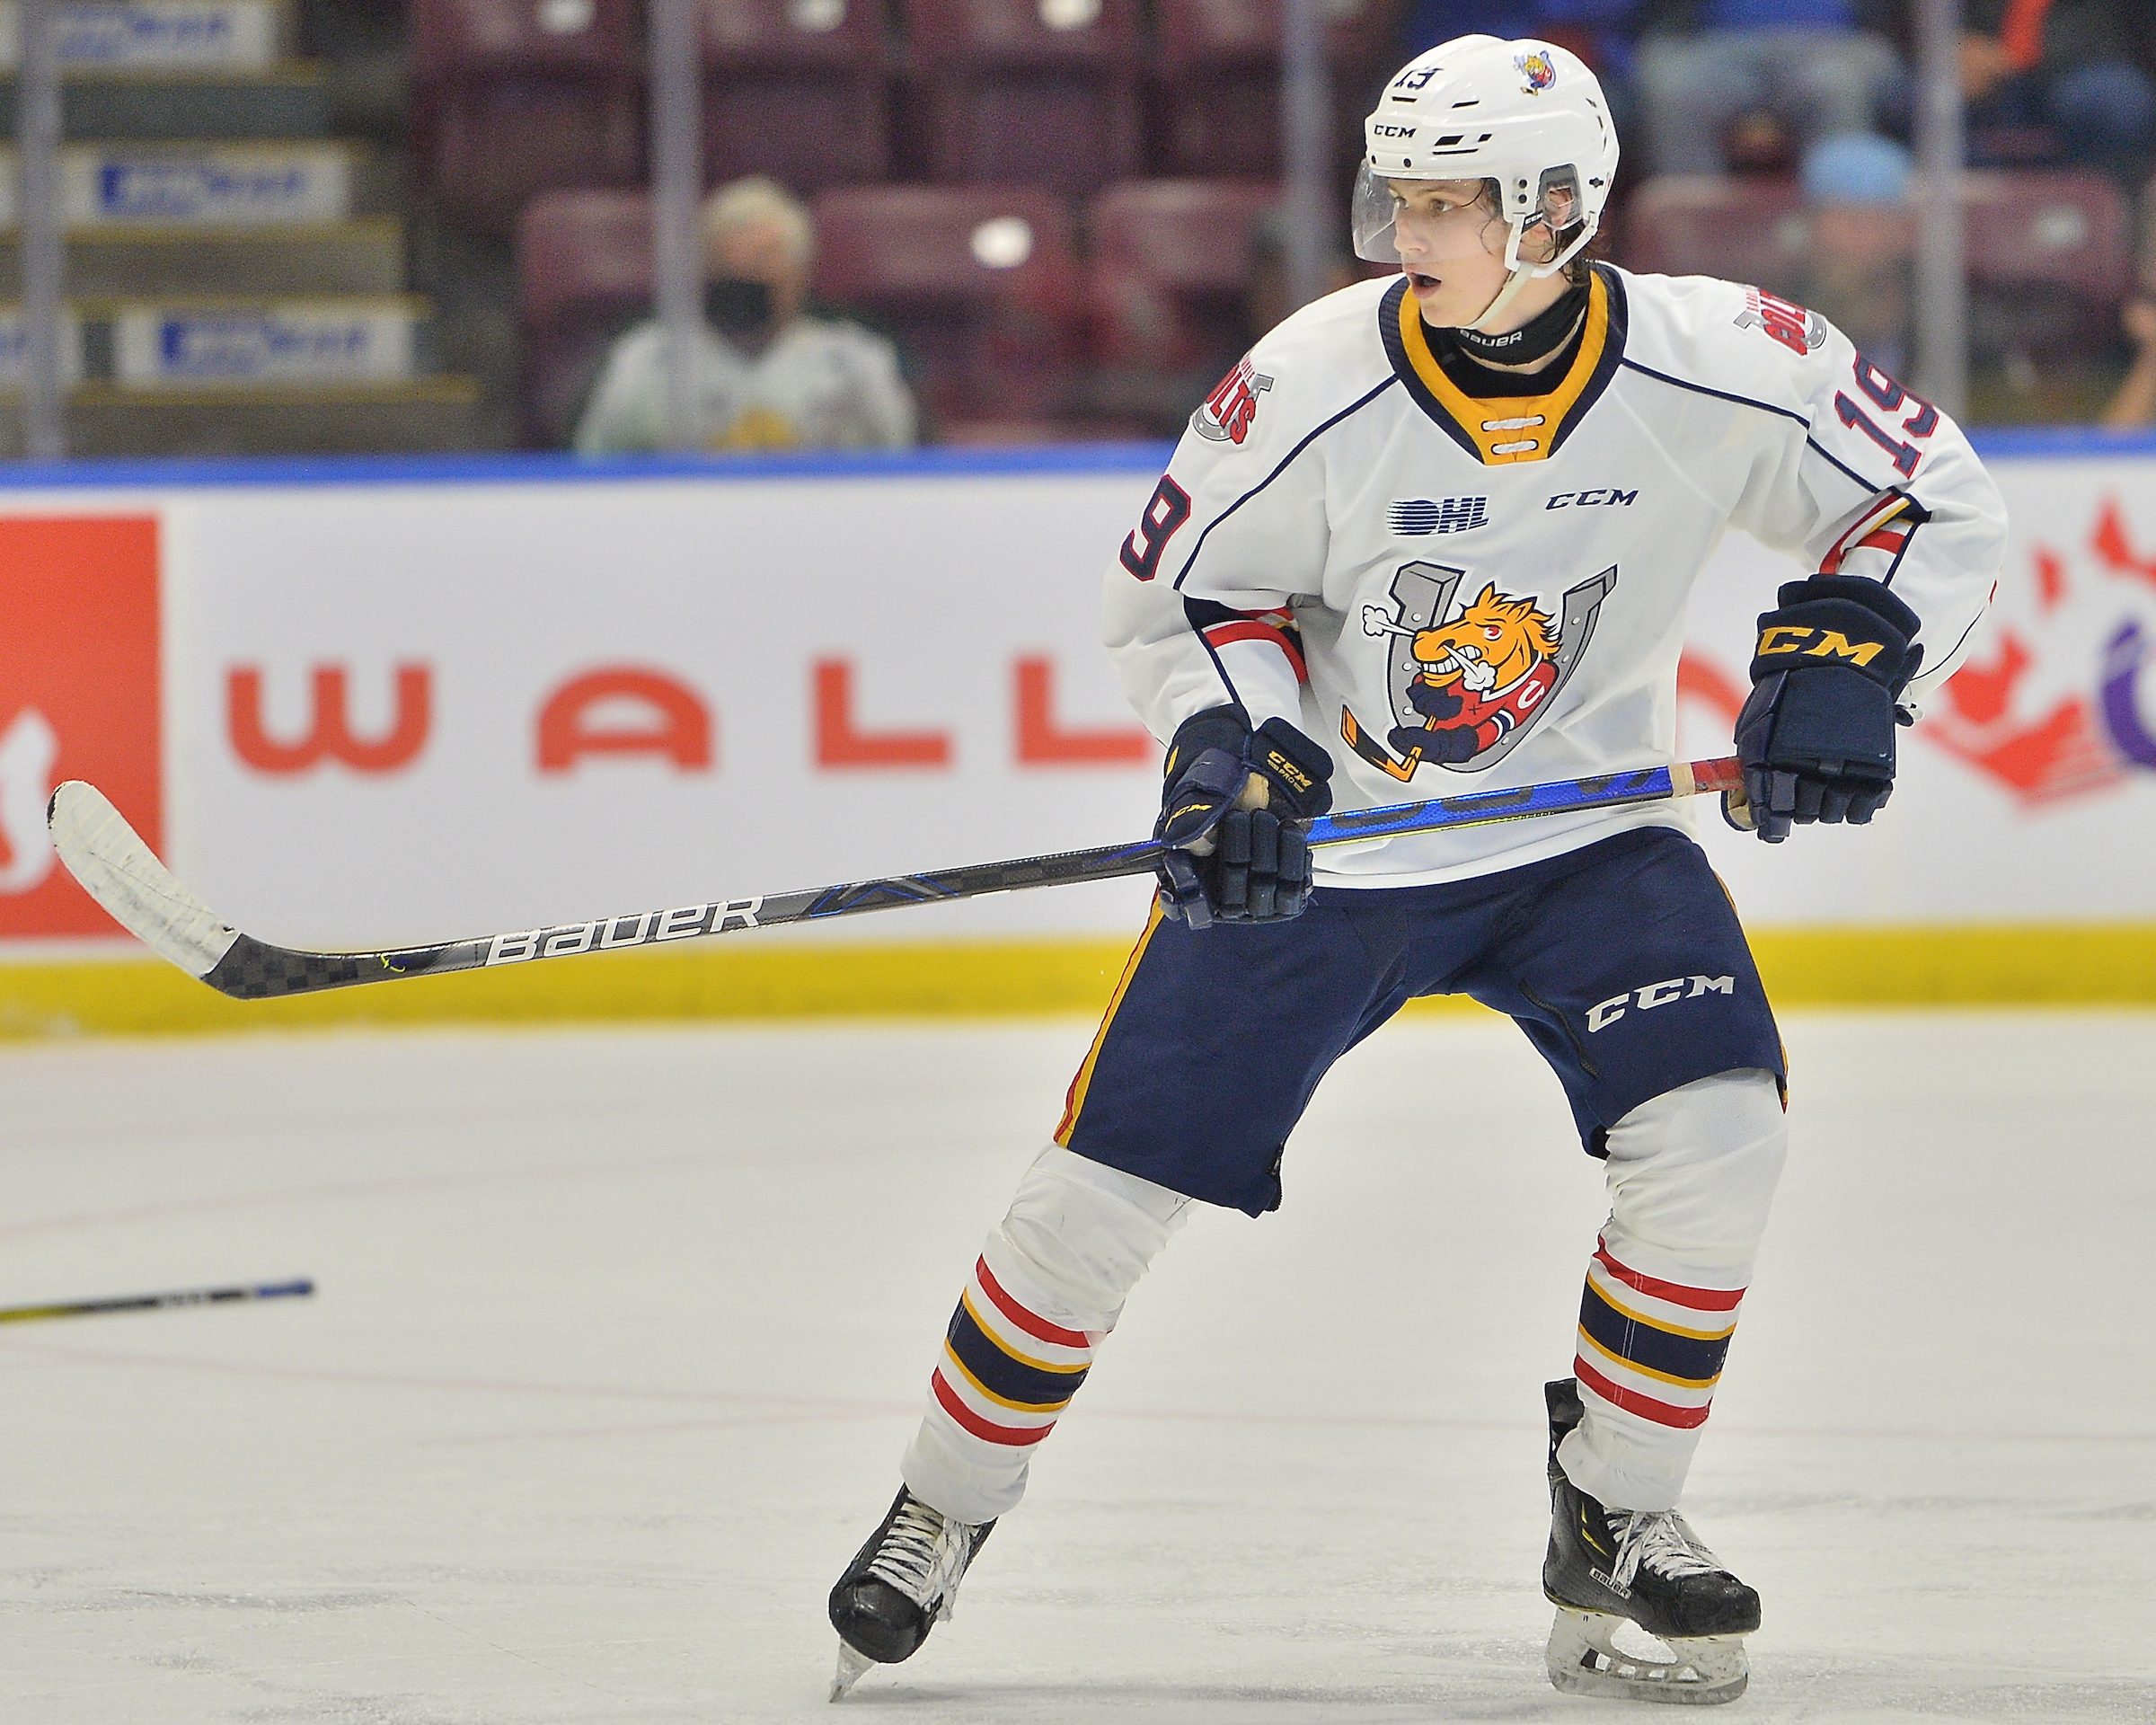 Mississauga Steelheads 2  Barrie Colts 5 (Video Highlights)